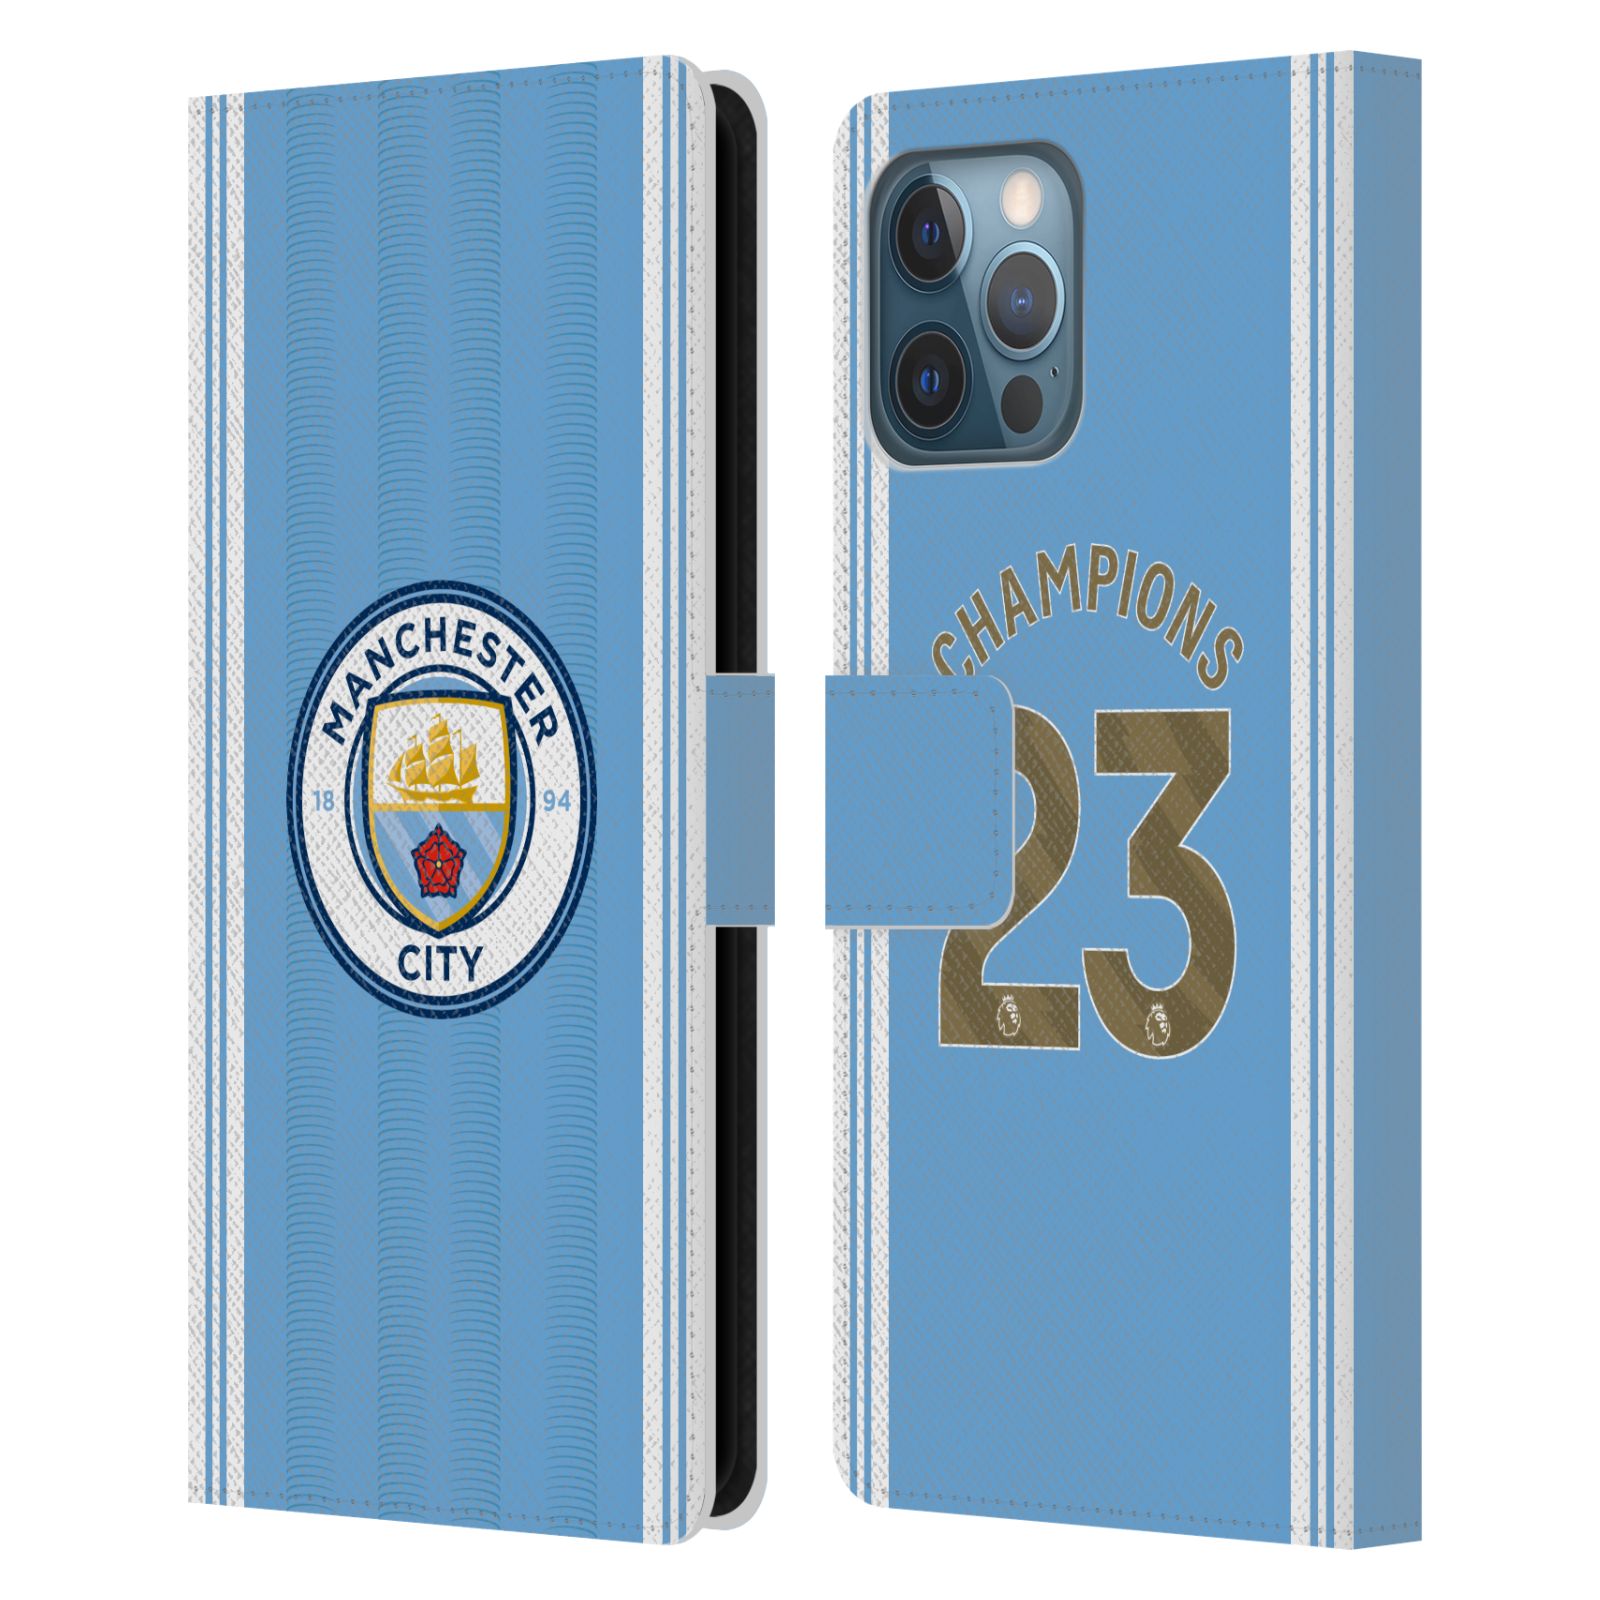 Pouzdro na mobil Apple Iphone 12 Pro Max - HEAD CASE - Manchester City - Champions dres 2